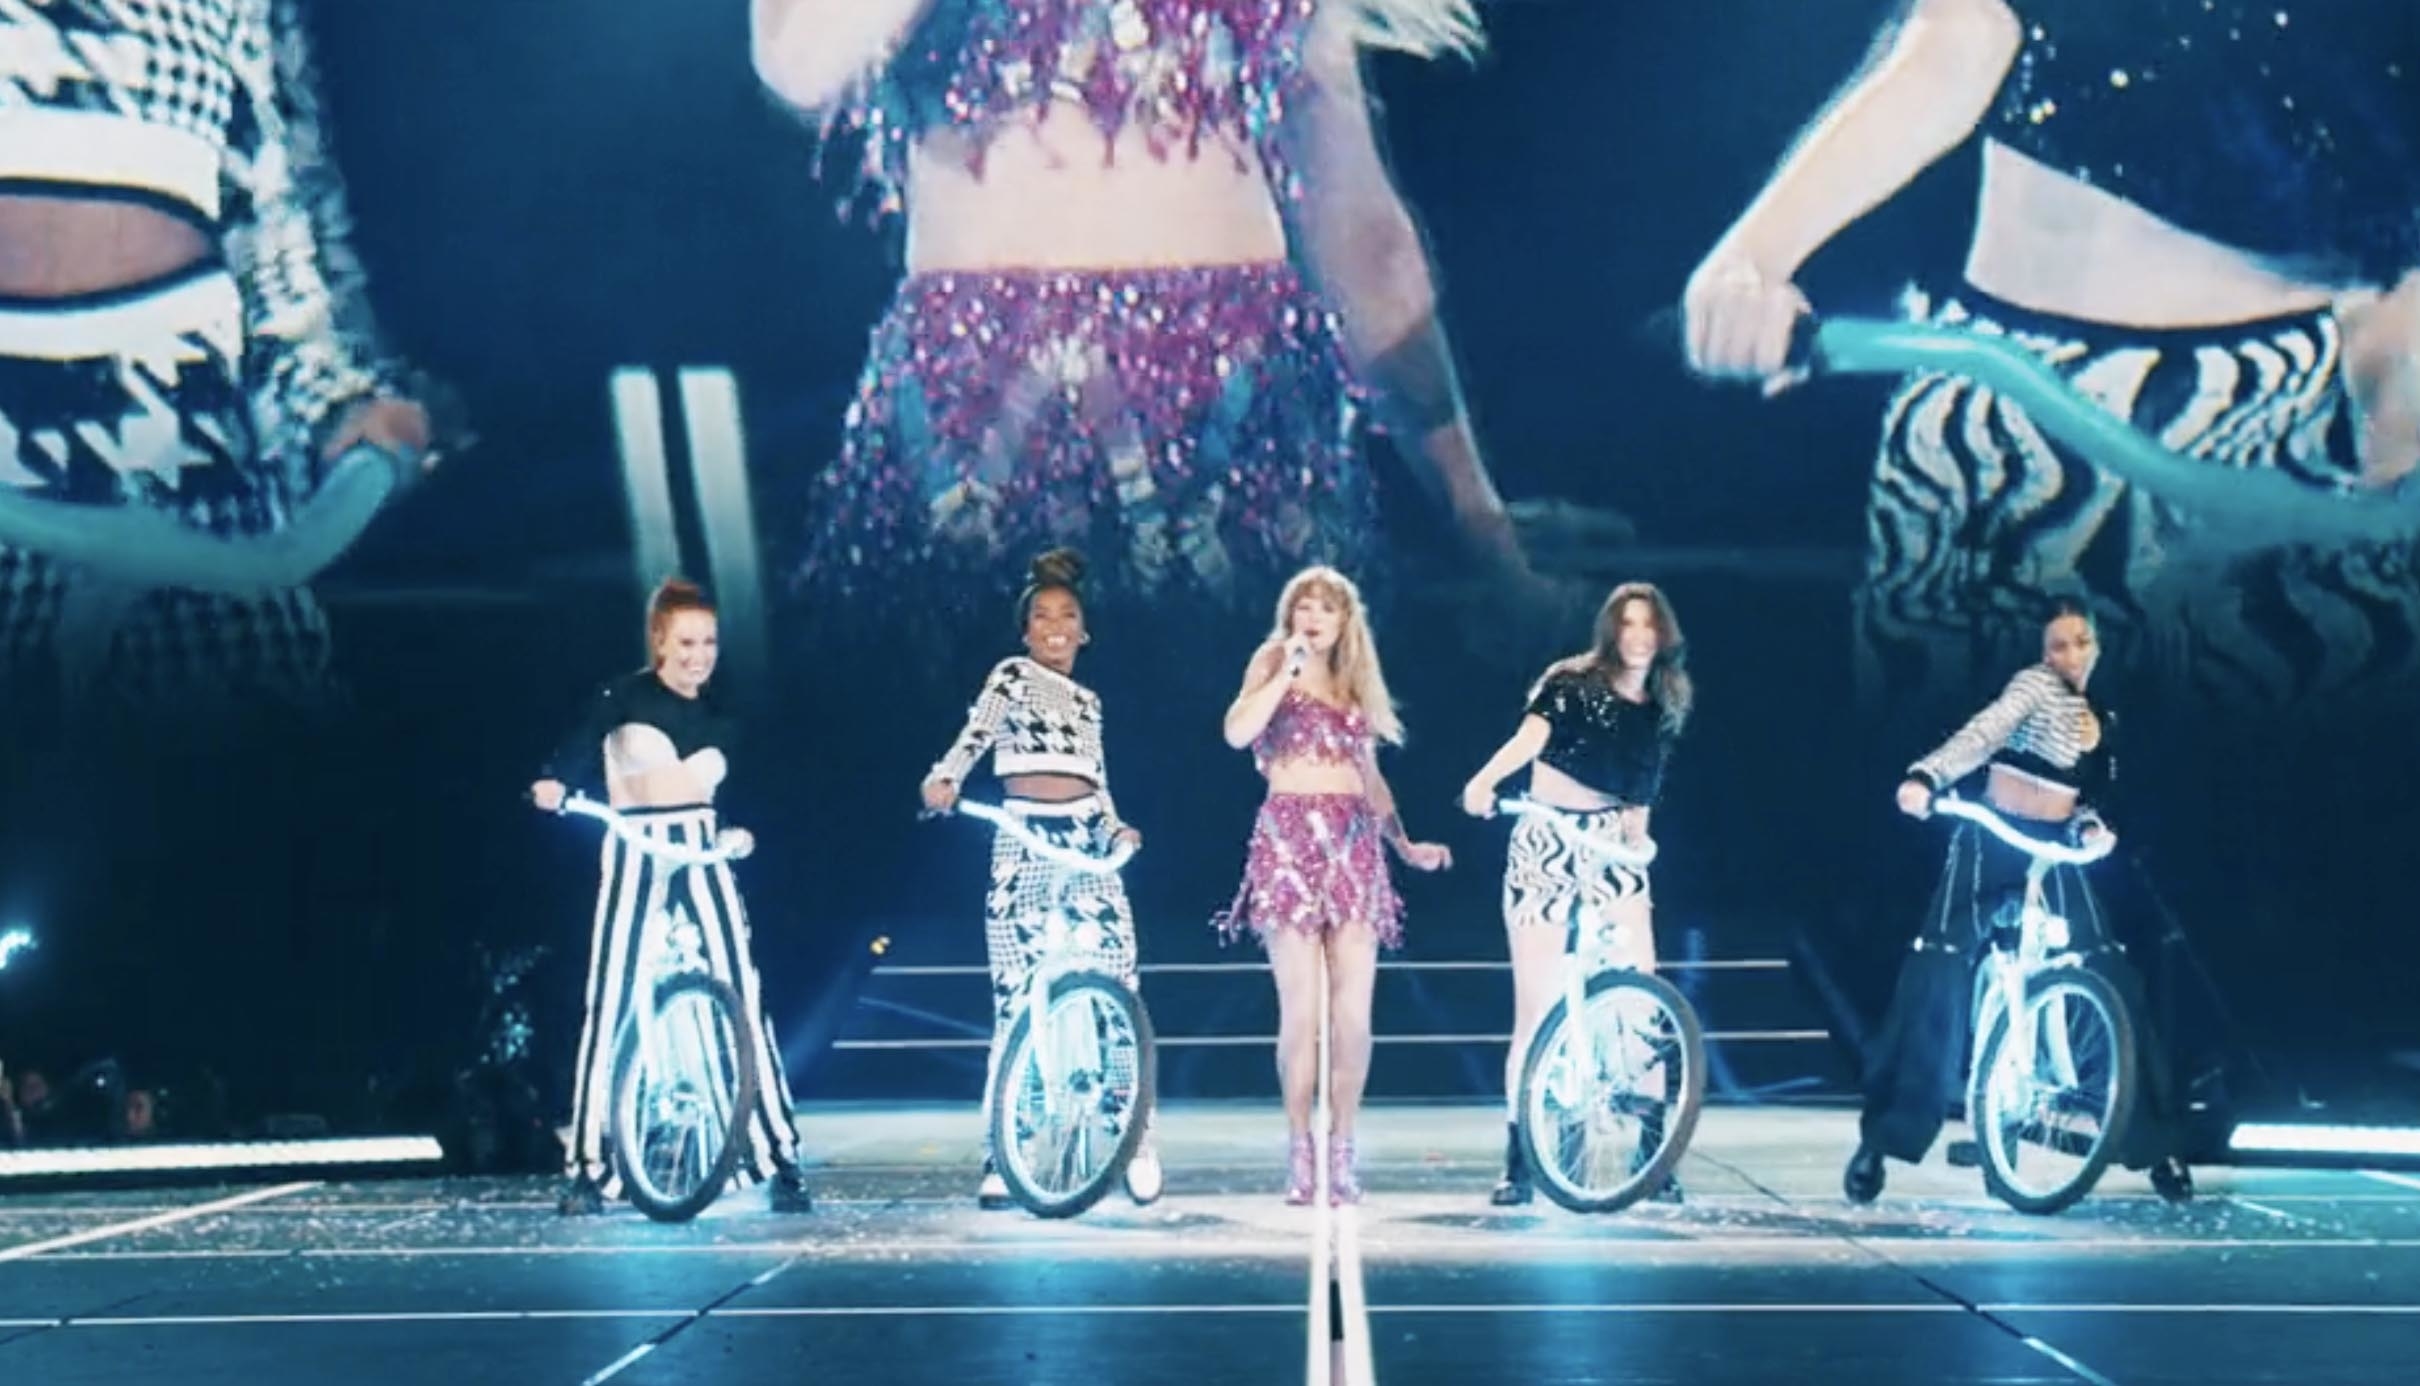 Taylor Swift performs on stage in a sparkling outfit, flanked by four dancers with illuminated bicycles during a concert